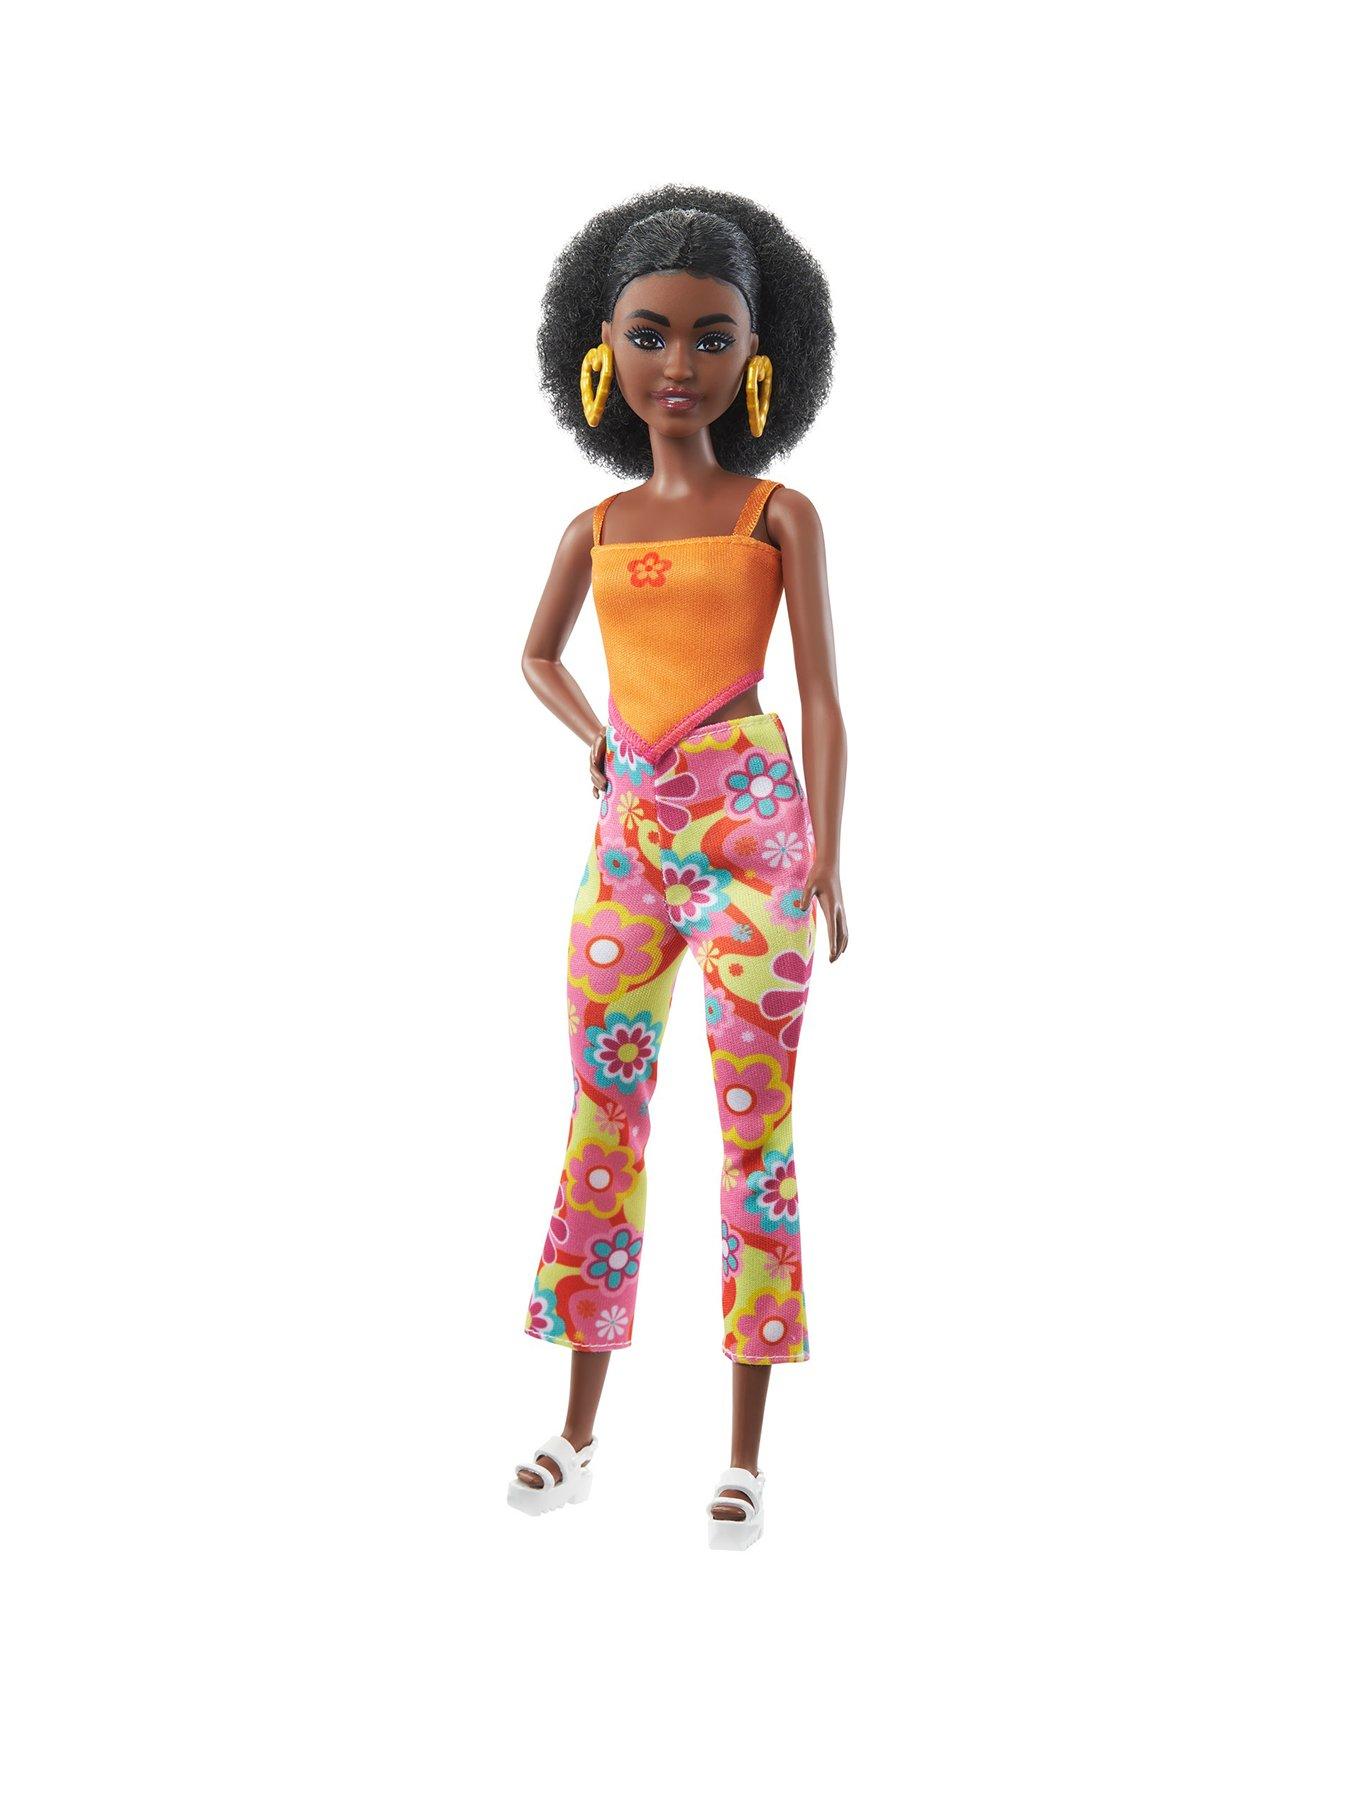 Barbie Fashionista Doll #198 in Retro Florals Outfit | Very Ireland